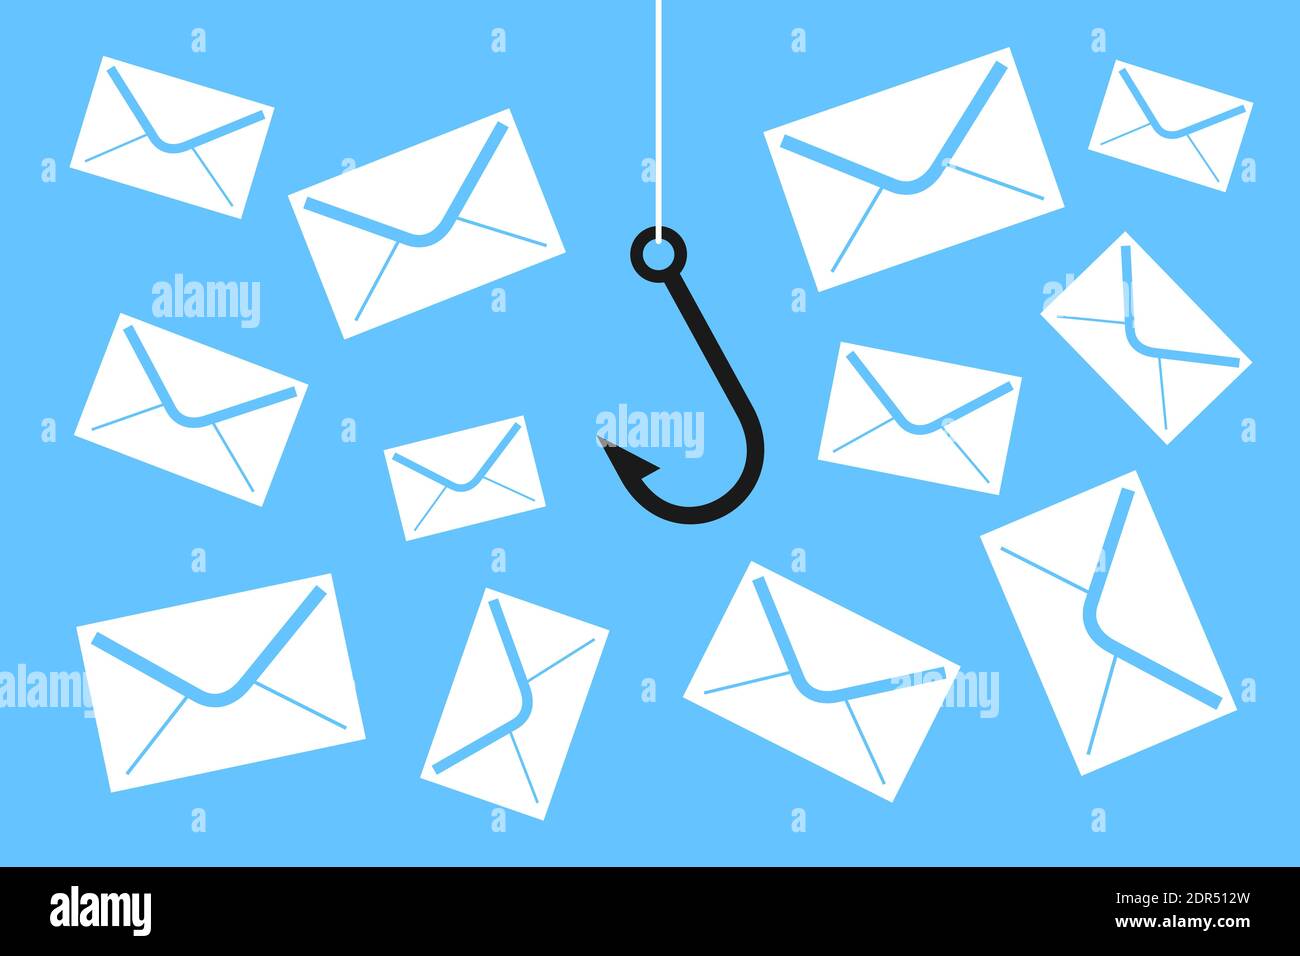 Phishing - fishing hook is catching mail envelope as metaphor of fraudulent and deceptive dangerous and risky e-mail correspondence. Vector illustrati Stock Photo